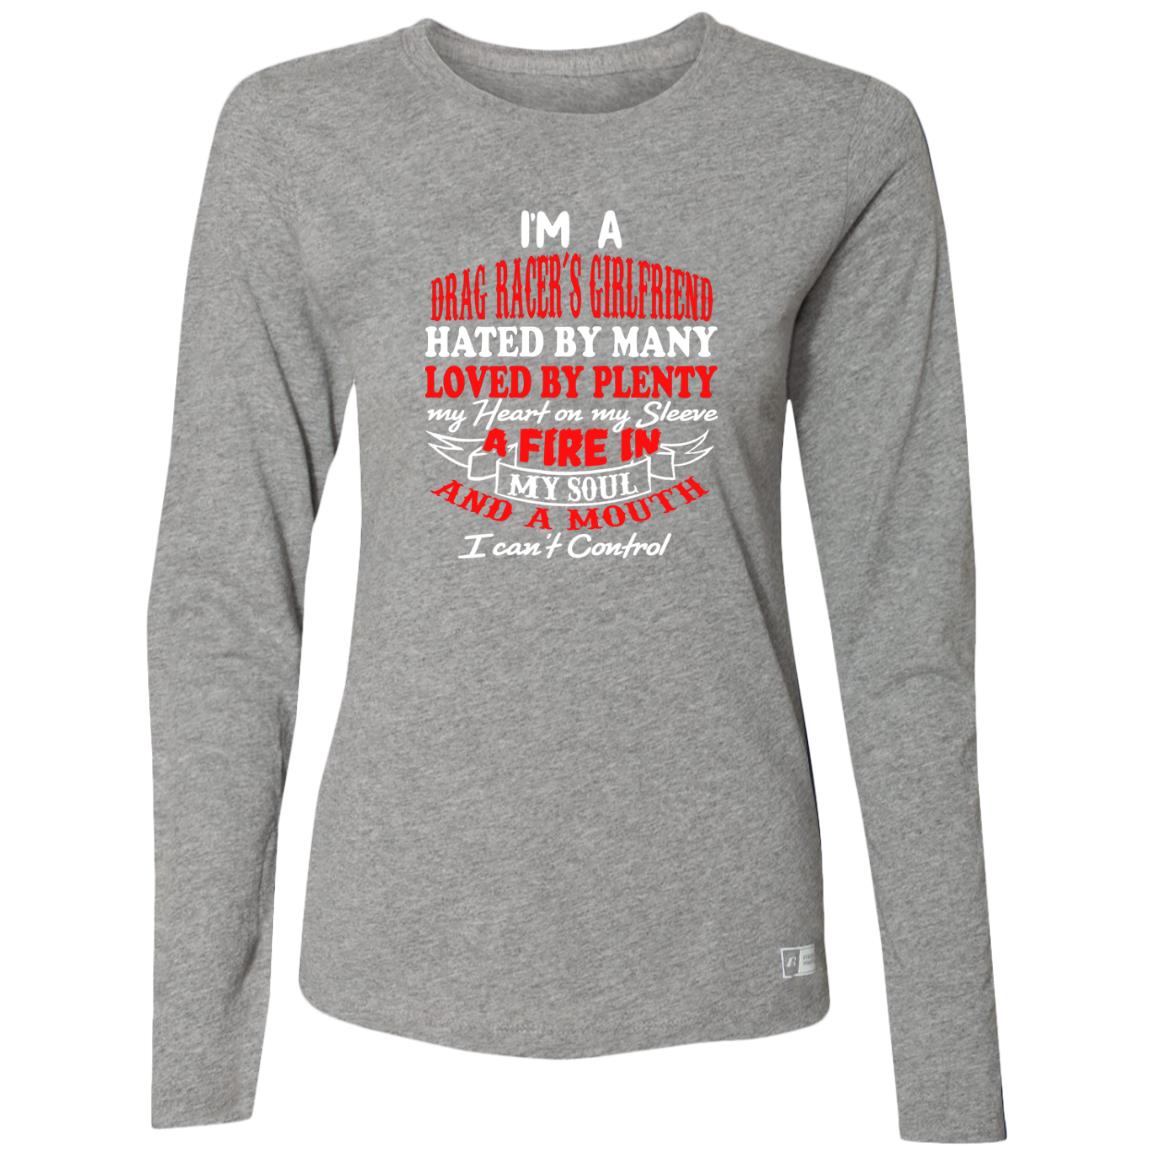 I'm A Drag Racer's Girlfriend Hated By Many Loved By Plenty Ladies’ Essential Dri-Power Long Sleeve Tee